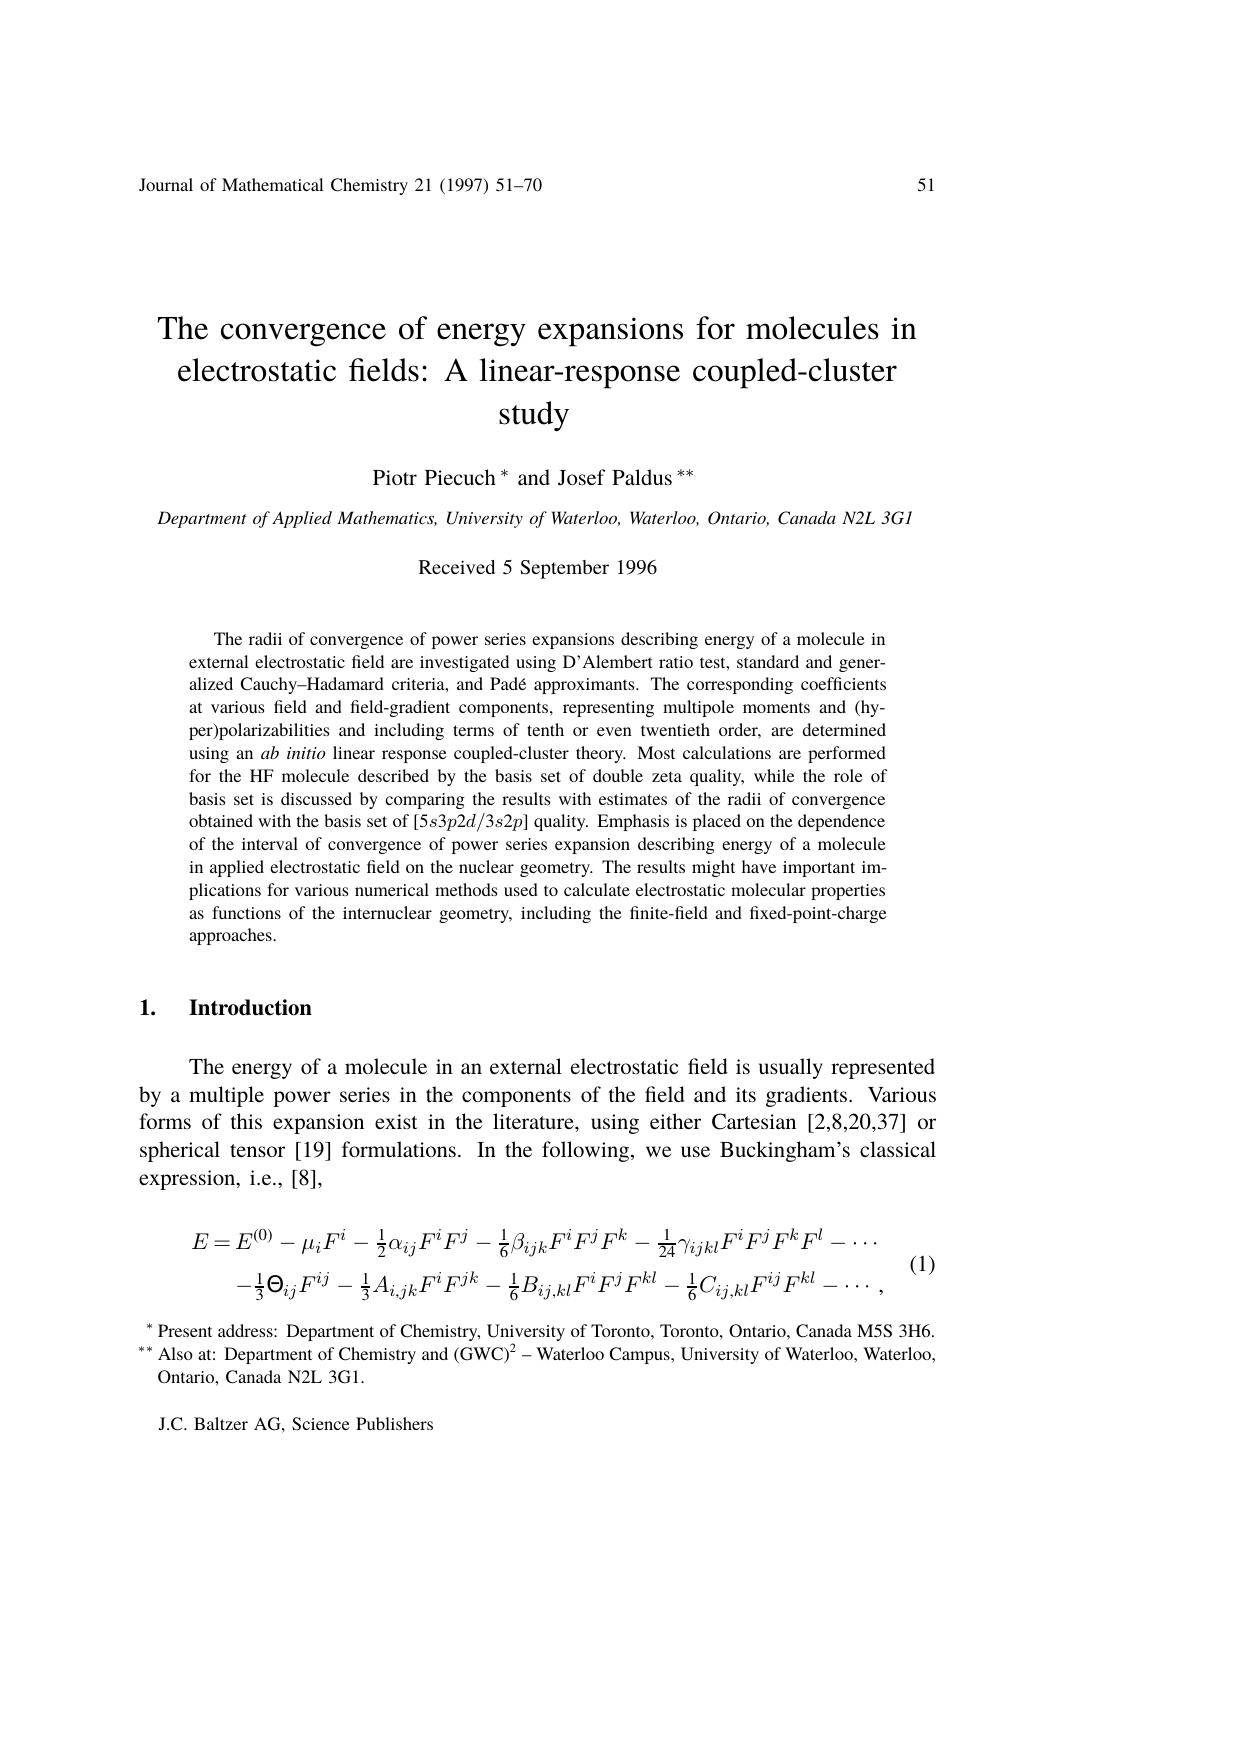 The convergence of energy expansions for molecules in electrostatic fields: A linear&#x2010;response coupled&#x2010;cluster study by Unknown